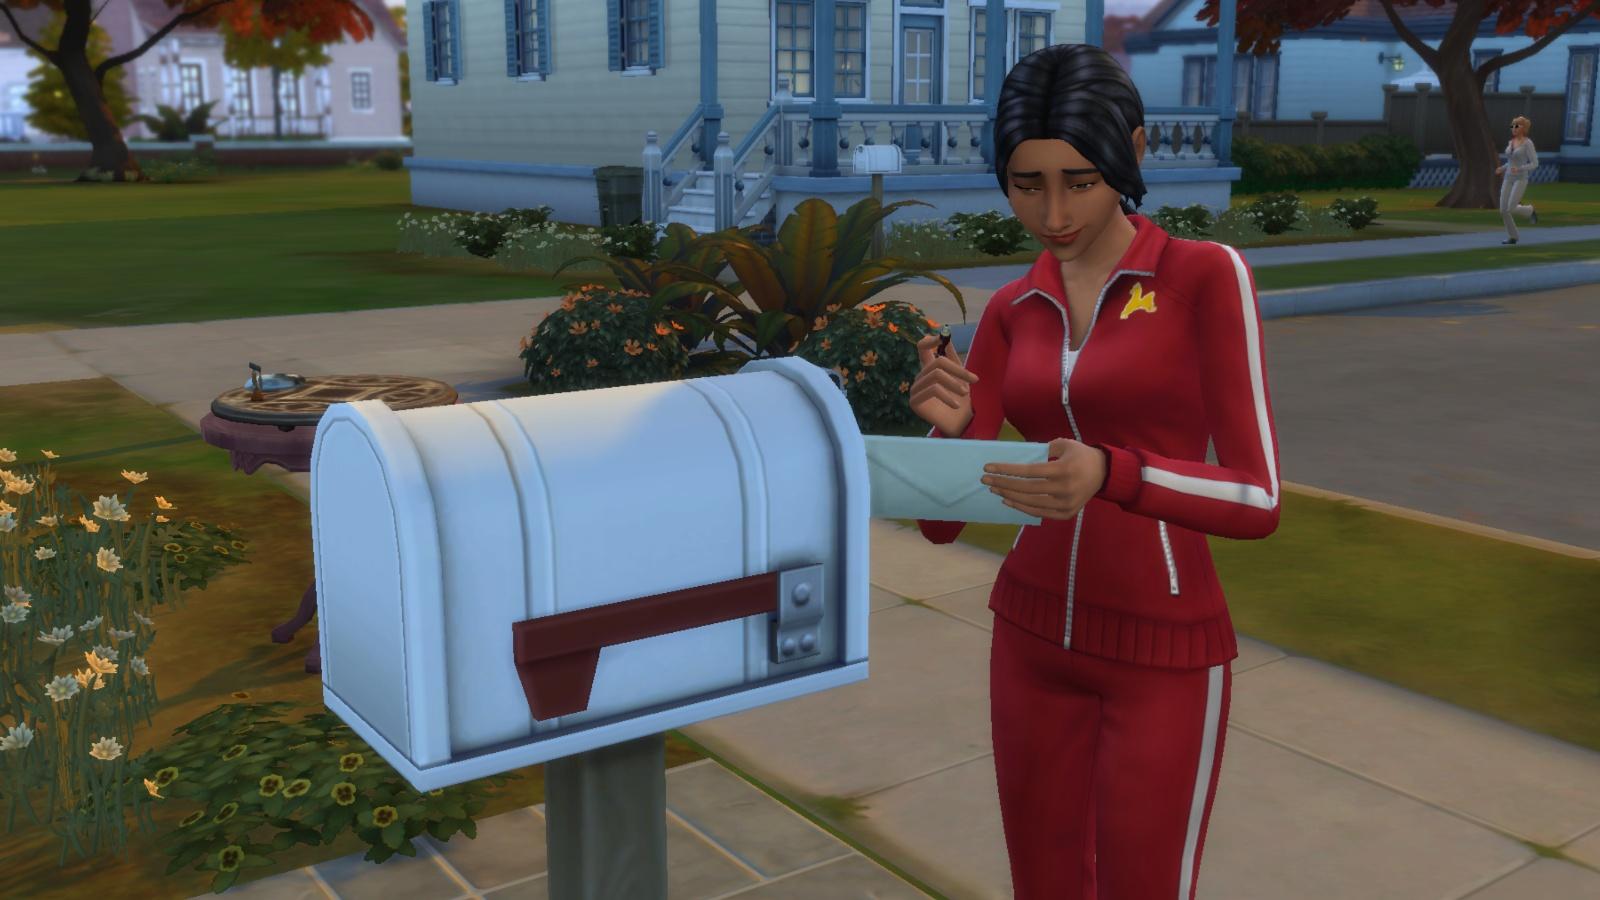 A screenshot featuring a Sim and a mailbox in The Sims 4.